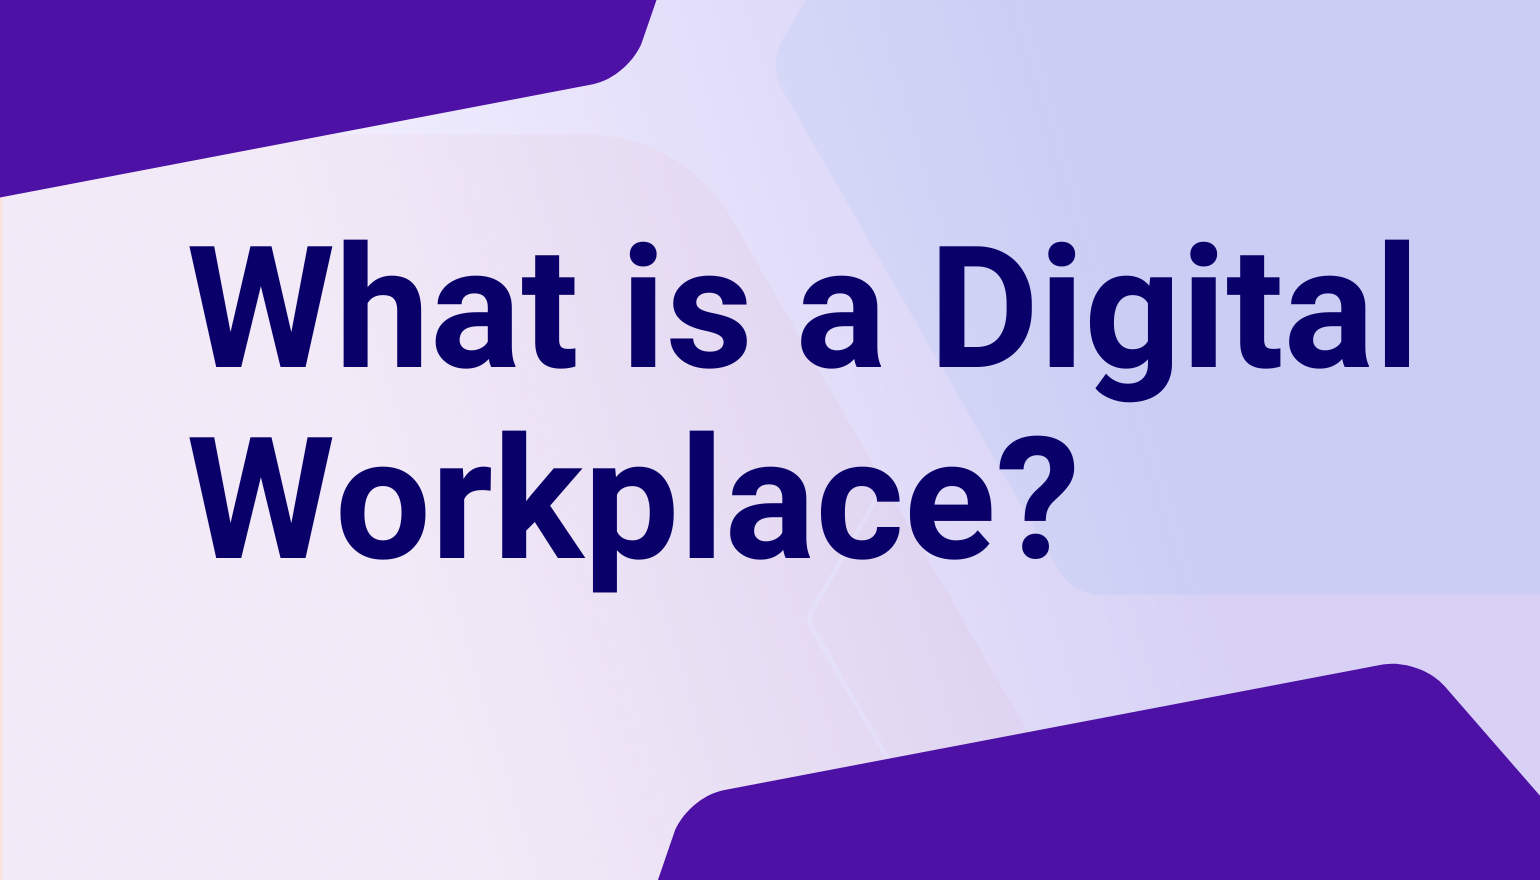 What is a Digital Workplace?